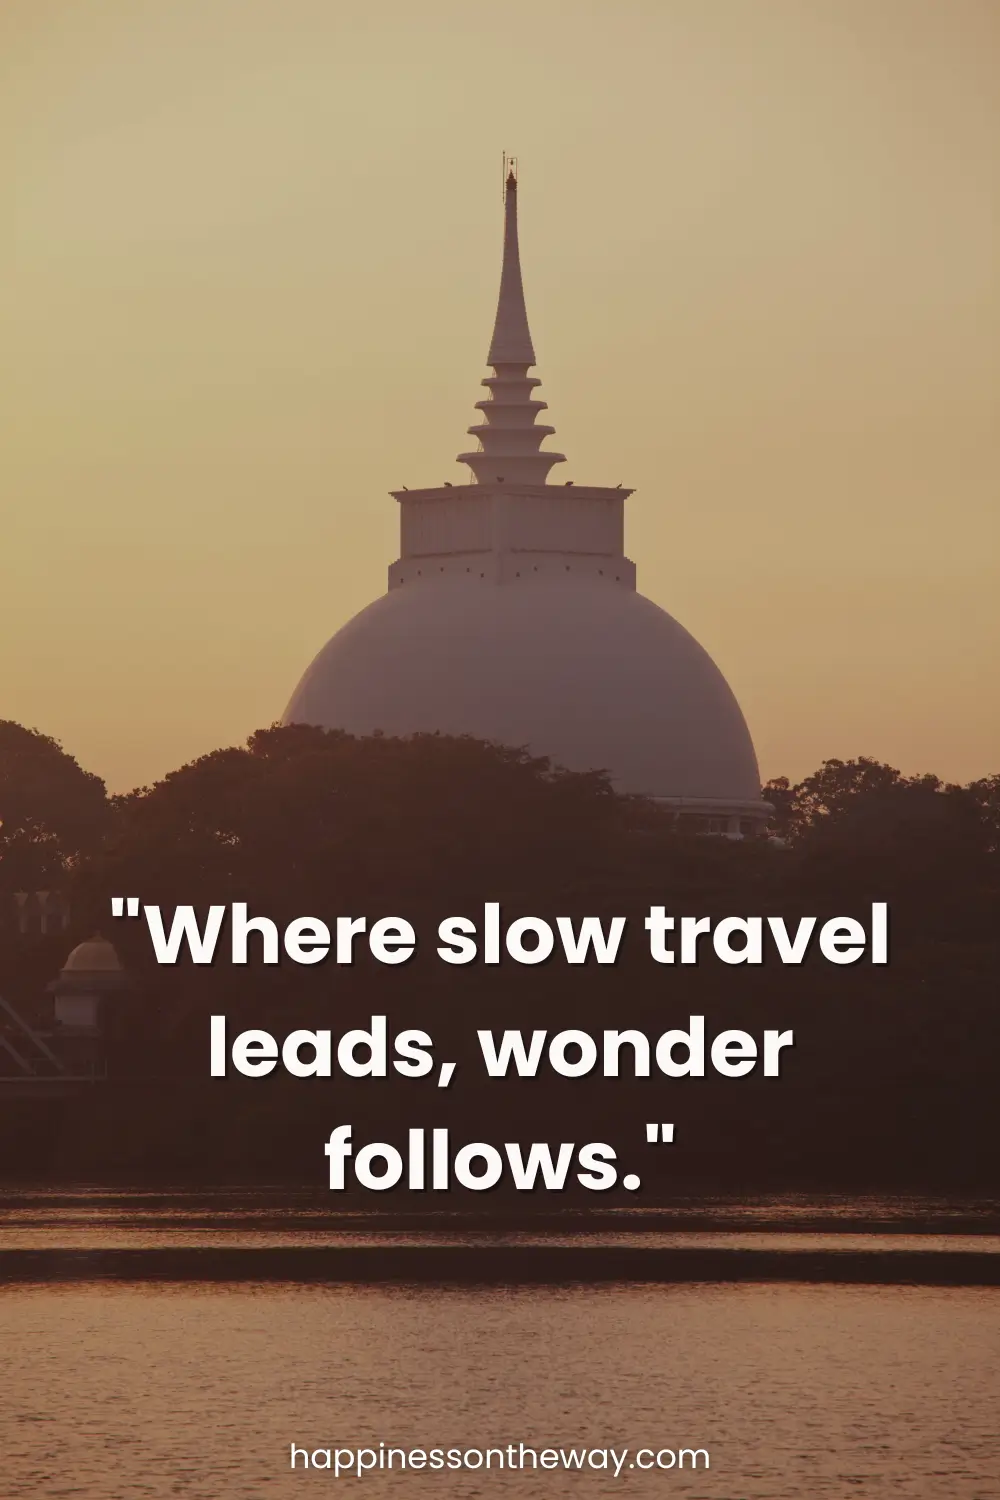 The silhouette of a stupa against a pastel sky with slow travel quote 'Where slow travel leads, wonder follows.'